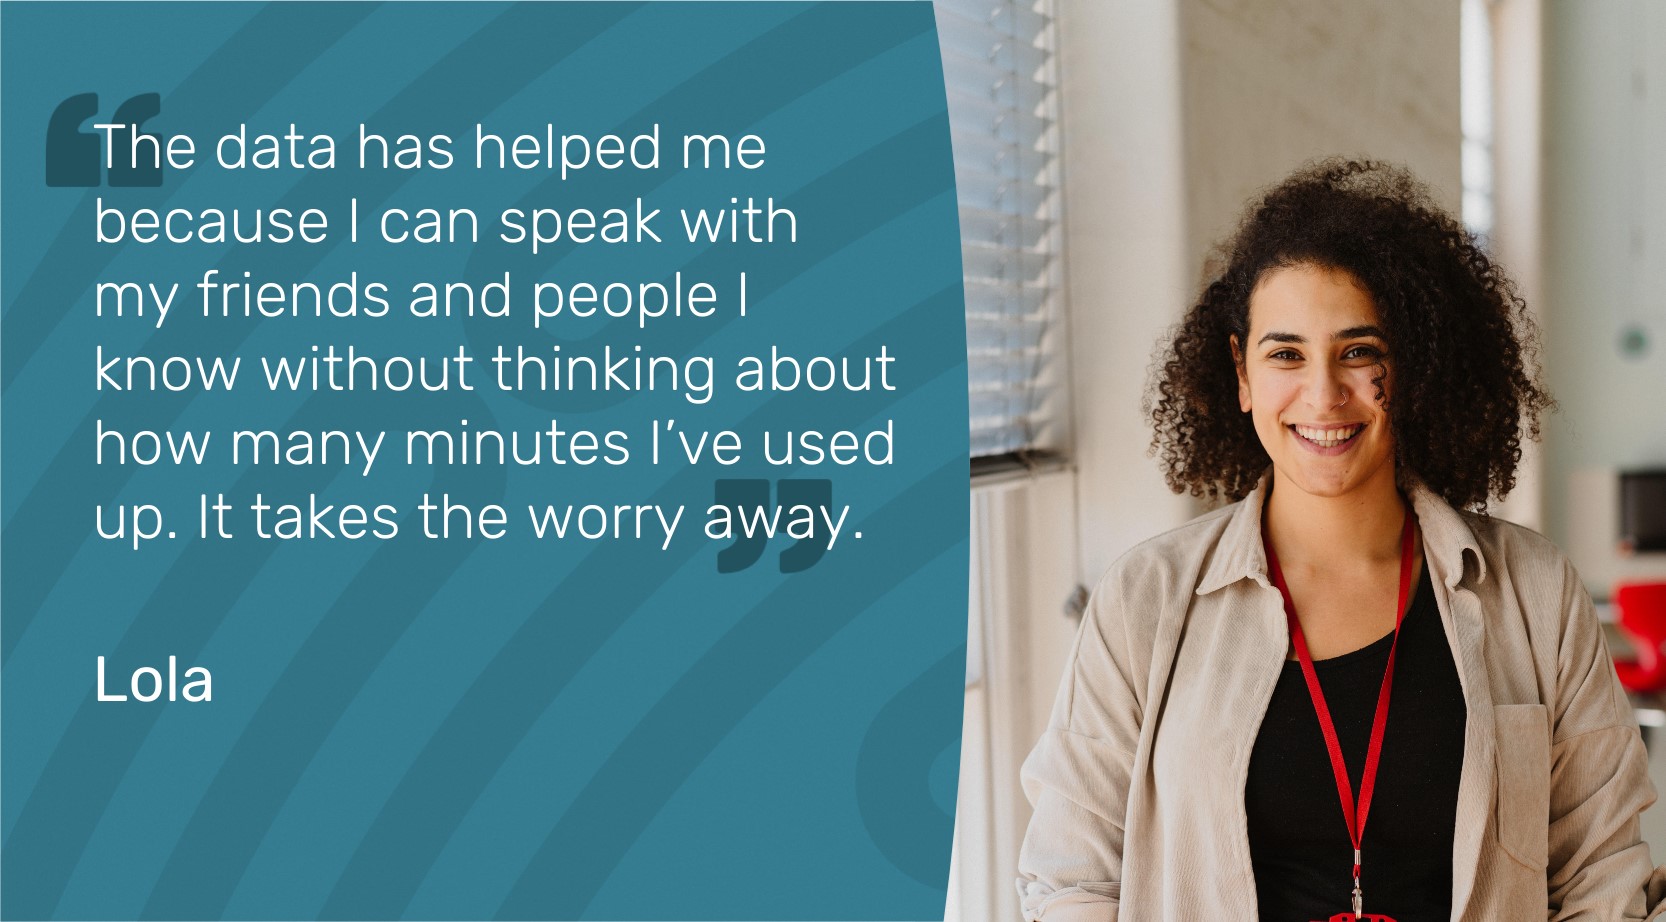 The data has helped me because I can speak with my friends and people I know without thinking about how many minutes I've used up. It takes the worry away. Quote by Lola